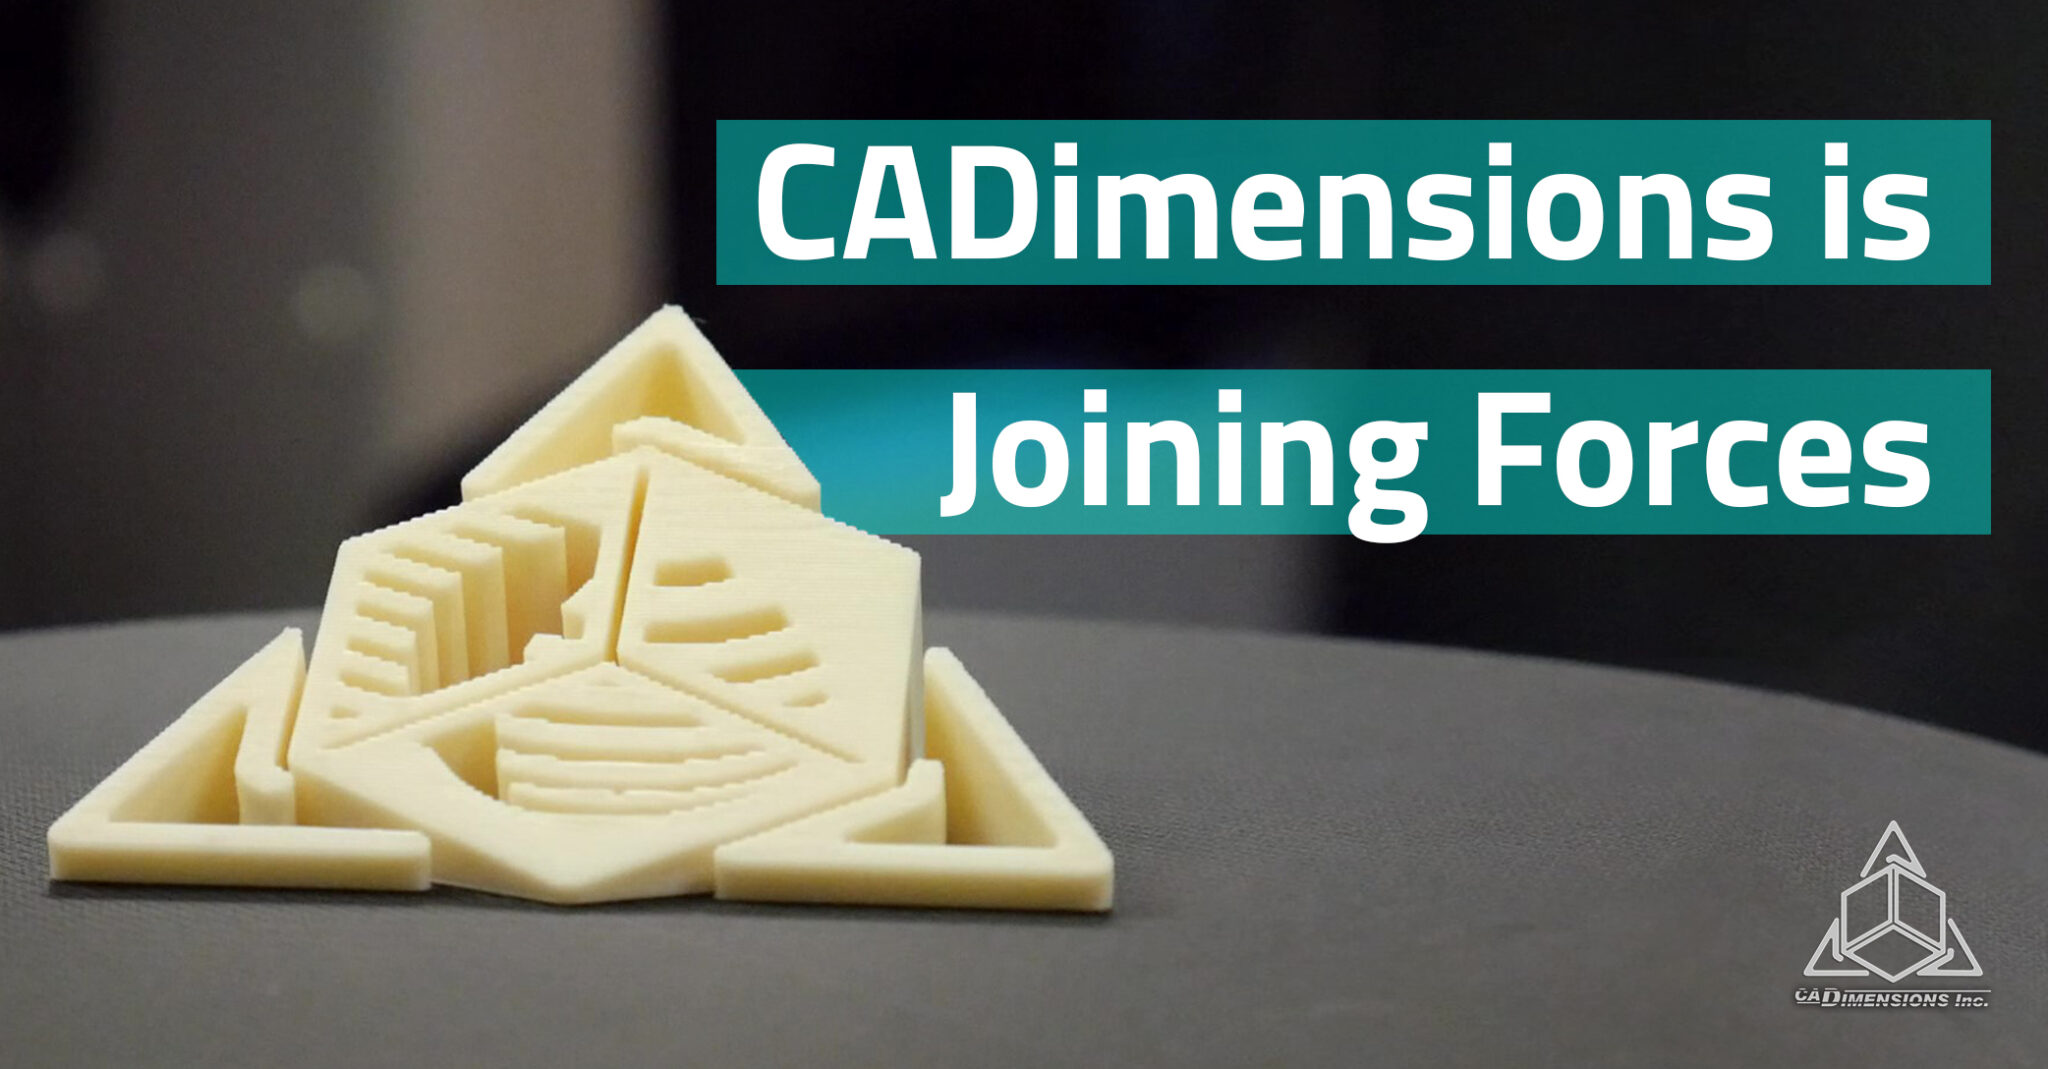 CADimensions and Unitec are joining fores 8-2019